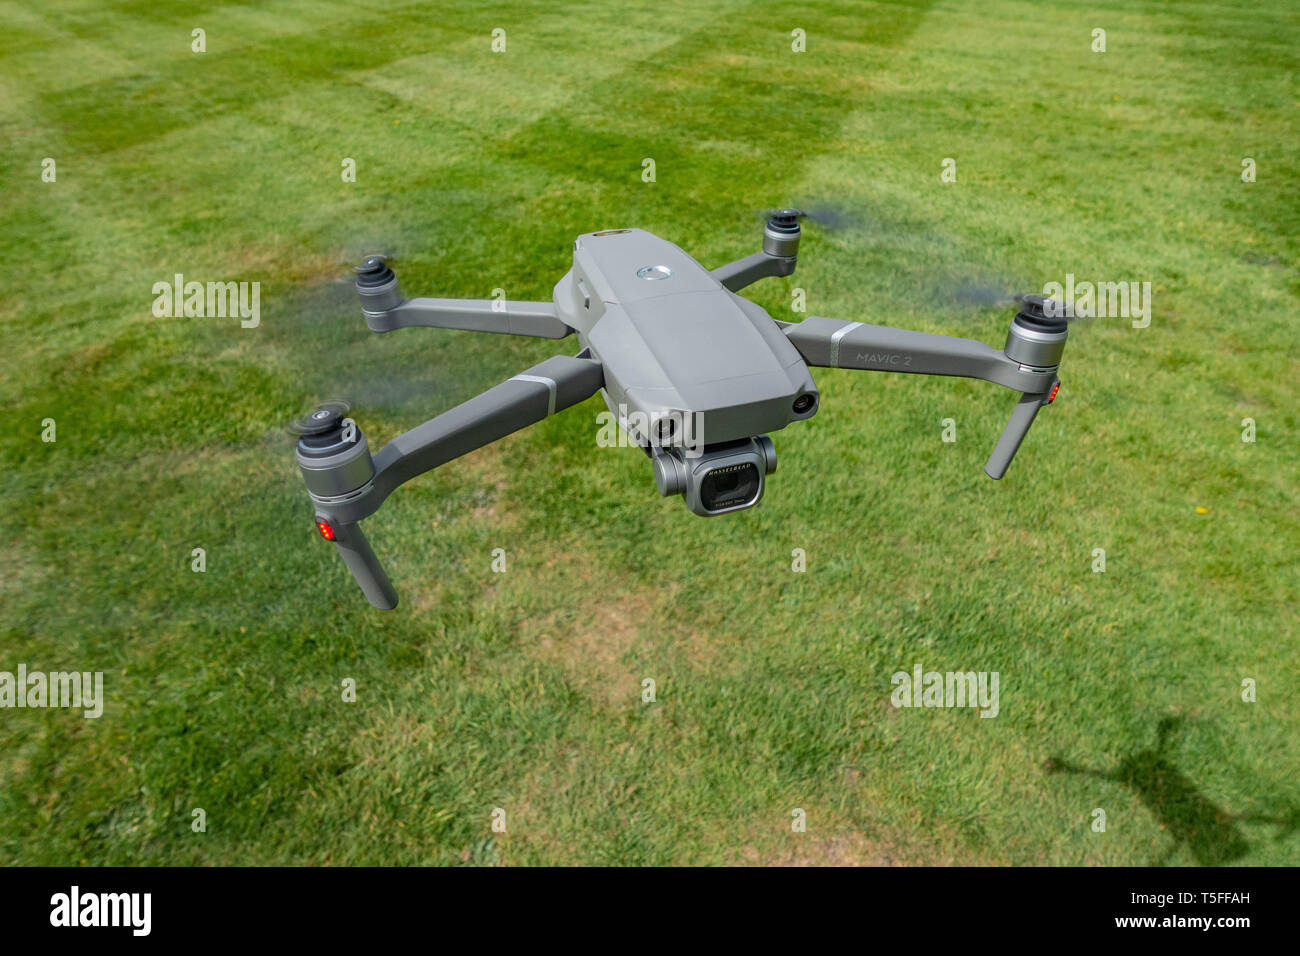 Looking down birds eye view onto a flying DJI Mavic 2 PRO personal Drone flying very low near to the ground Stock Photo